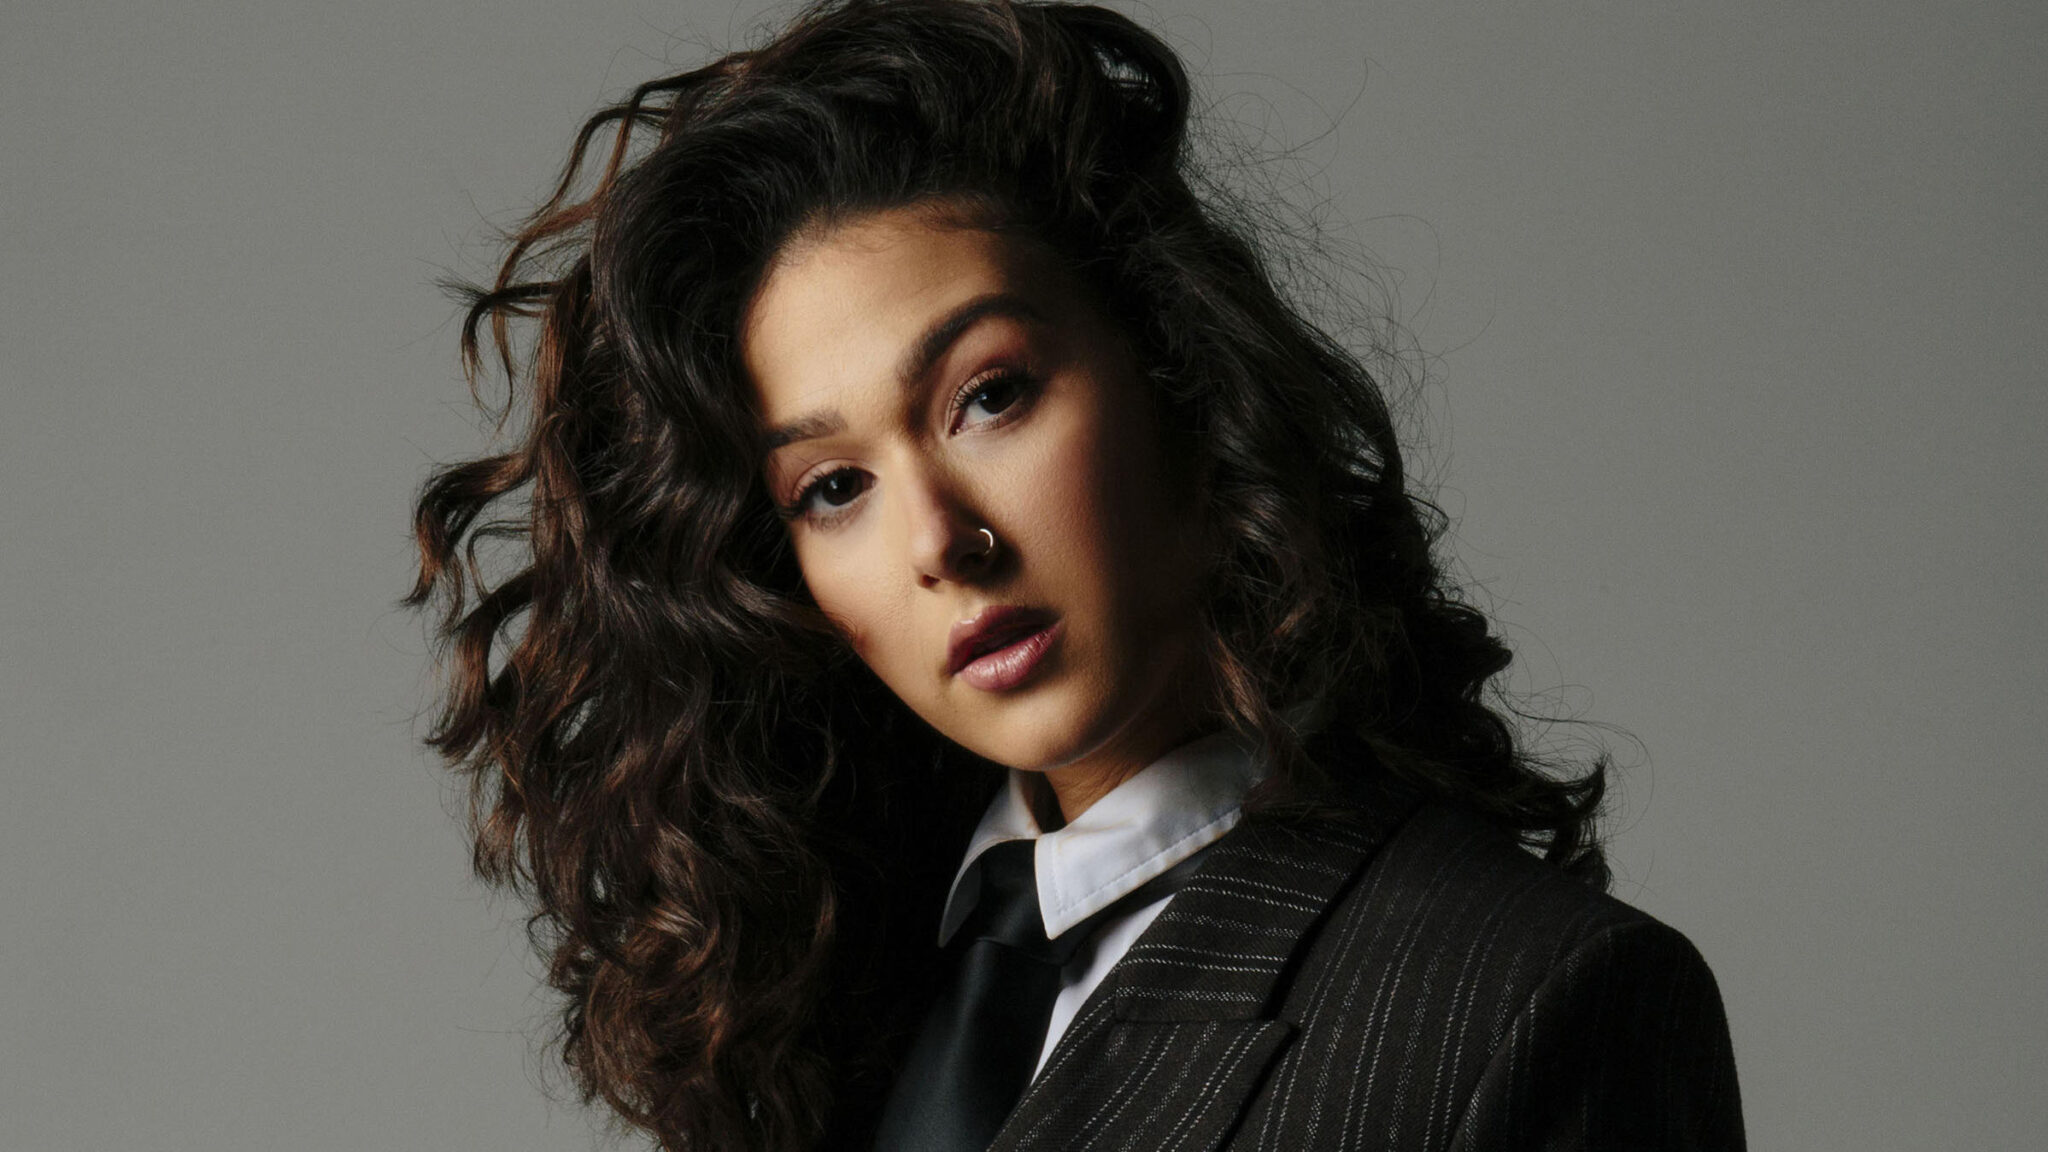 Confident woman with curly hair and a serious look, wearing a business suit with a modern twist.